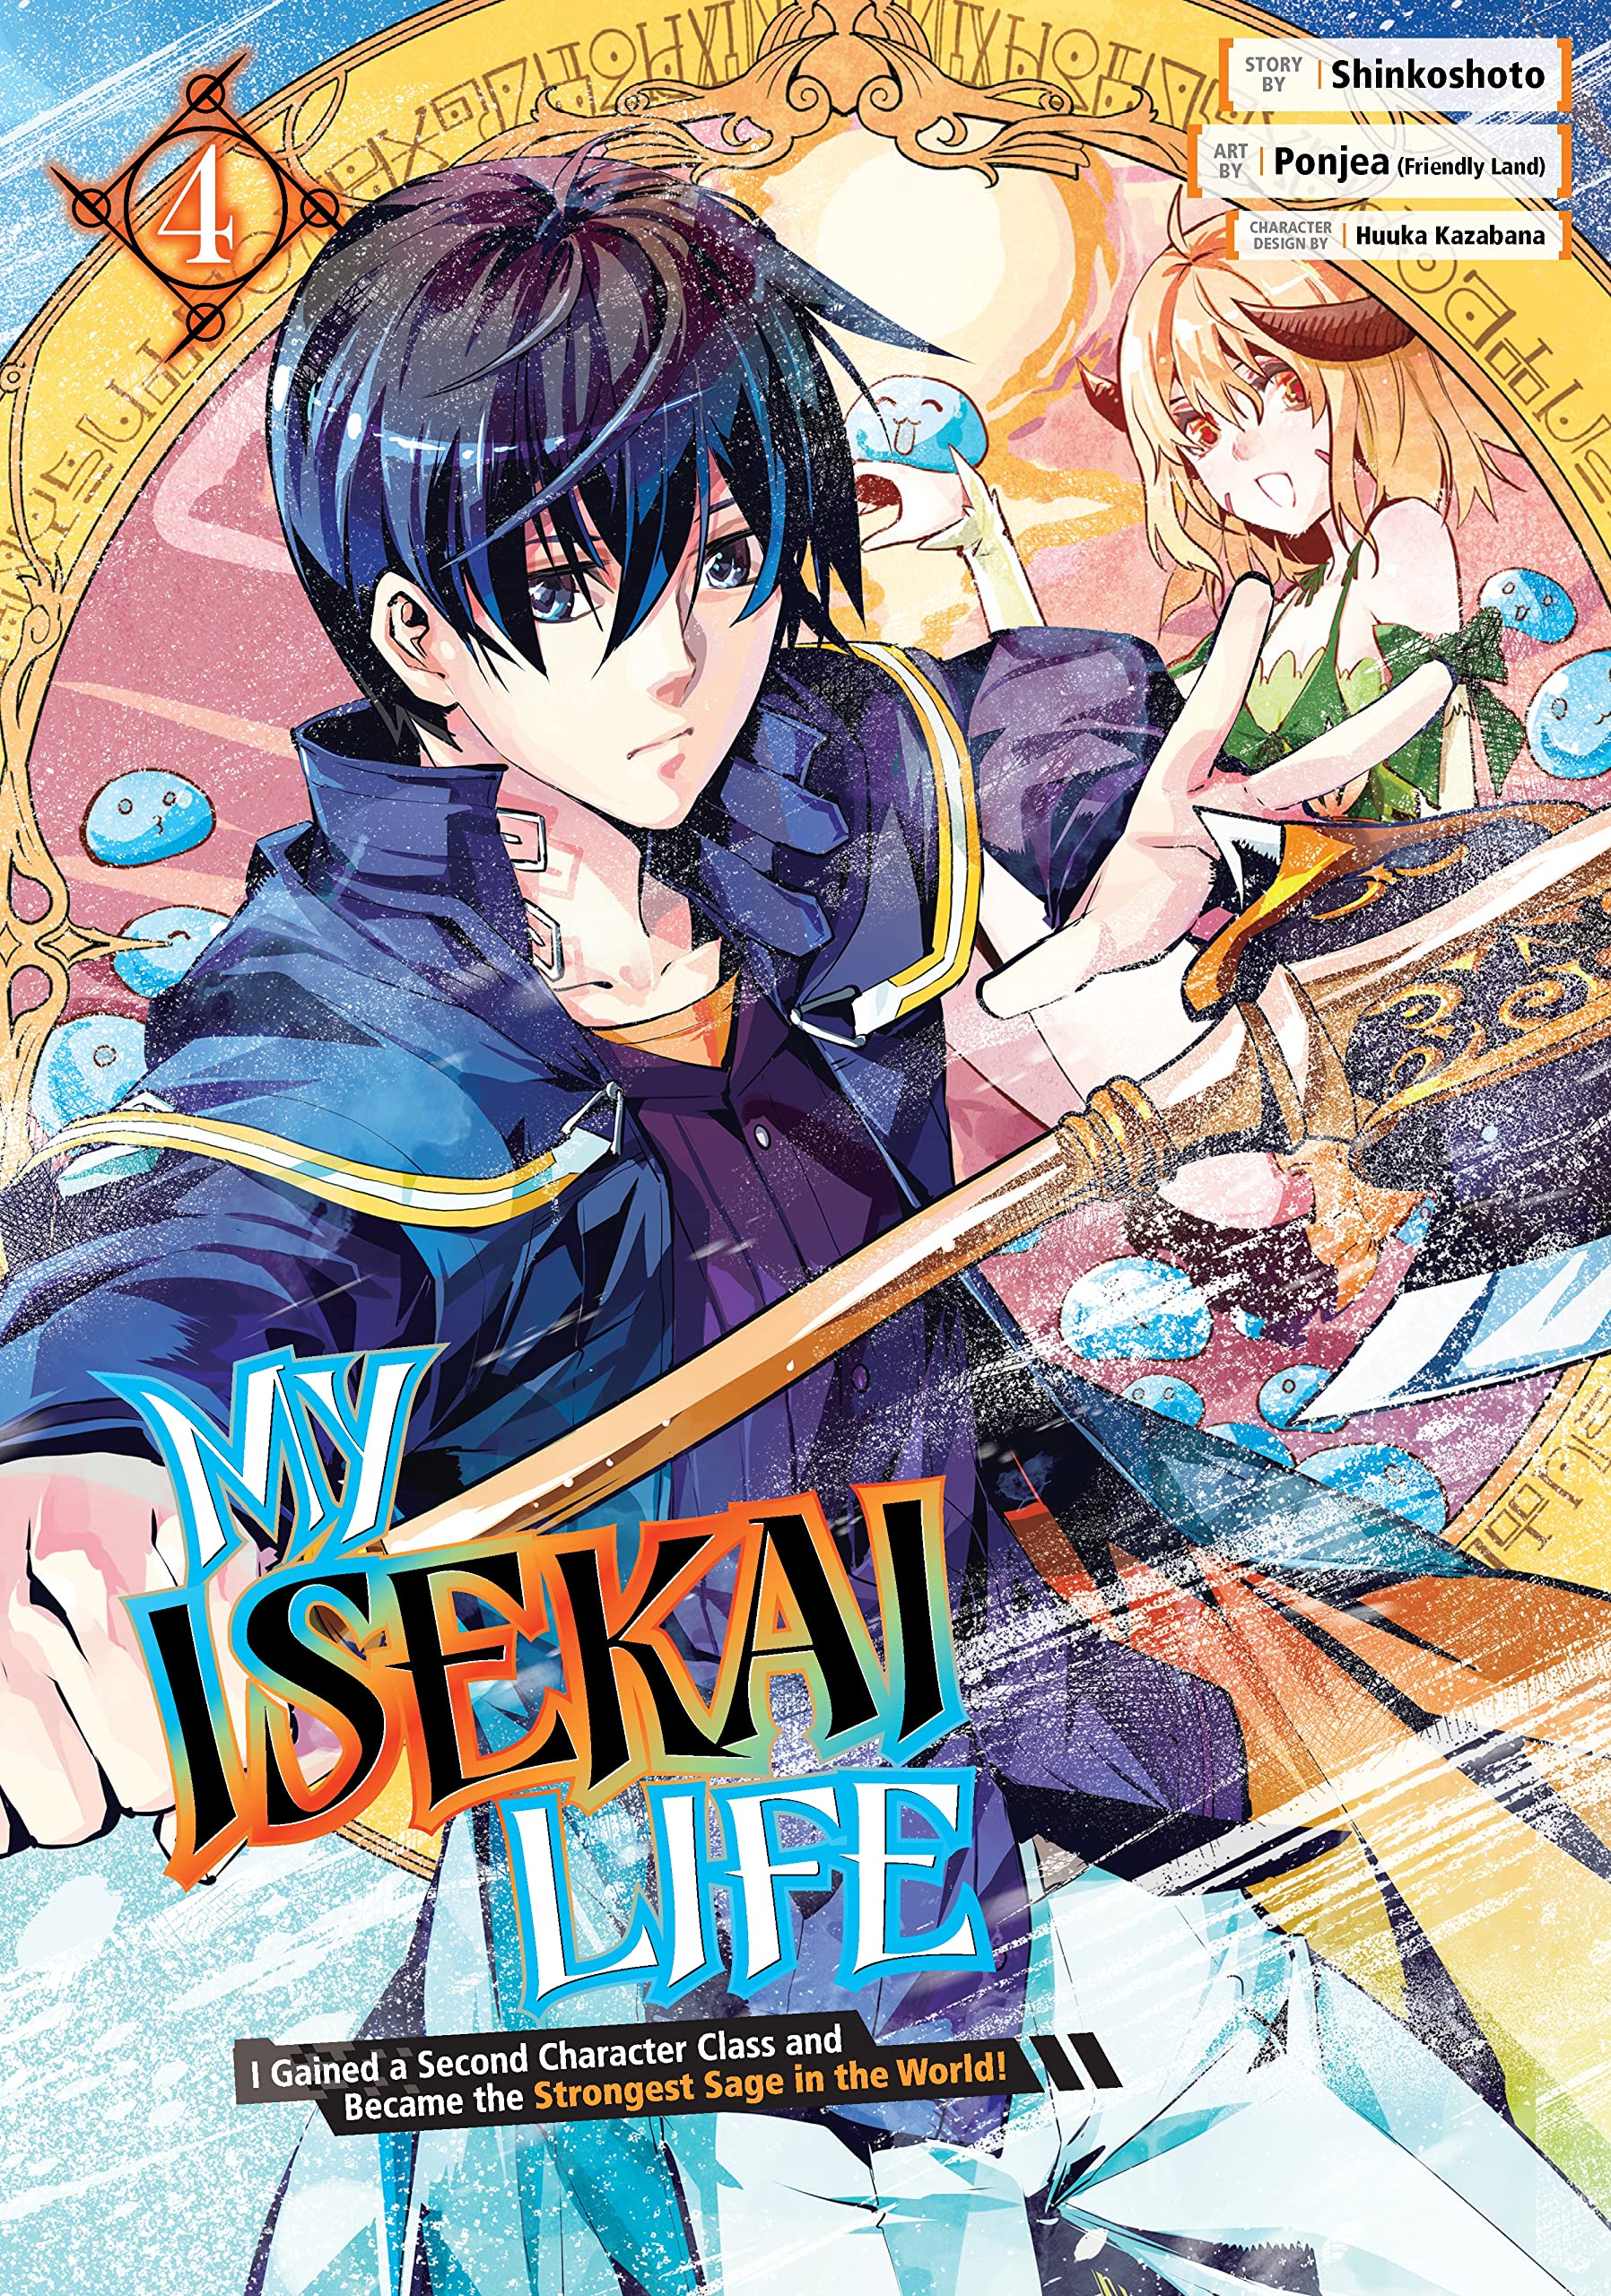 My Isekai Life: I Gained a Second Character Class and Became the Strongest Sage in the World! Vol. 04